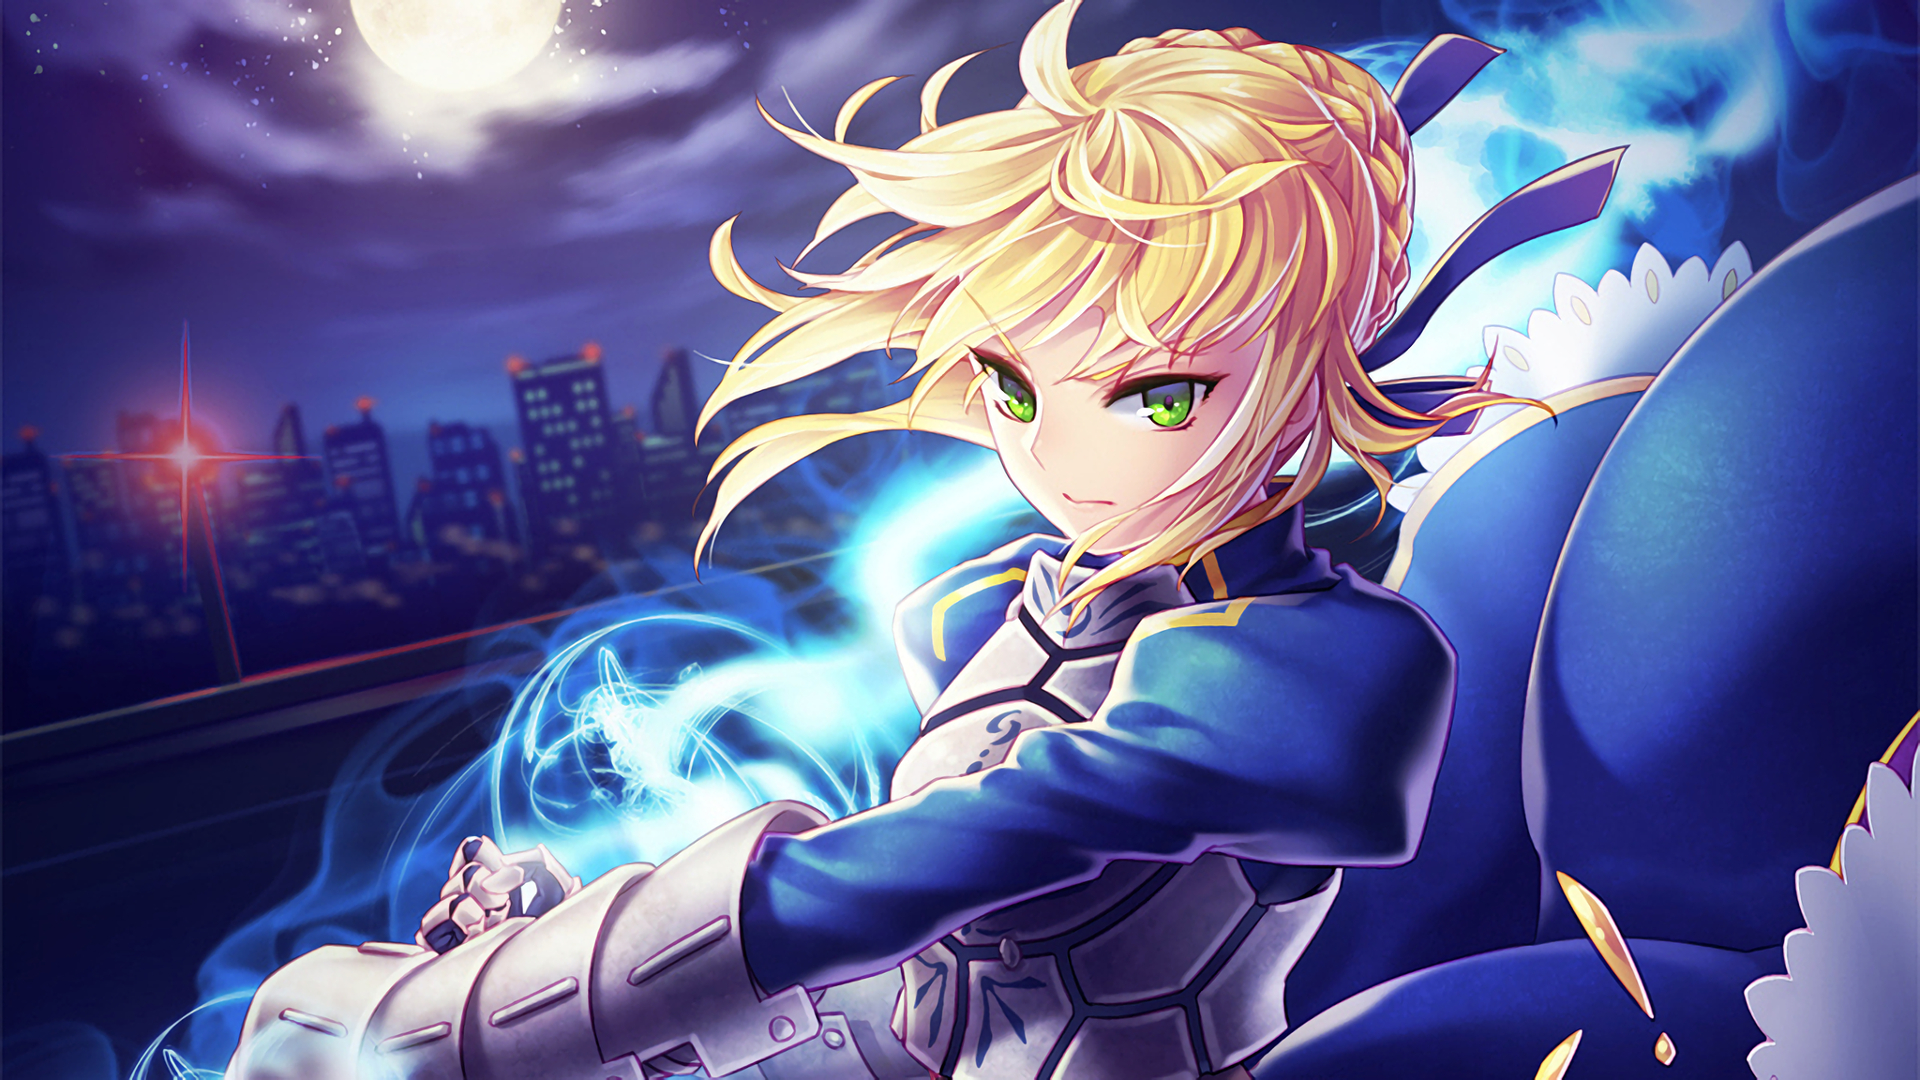 Saber Fate Series Hd Wallpaper Background Image 19x1080